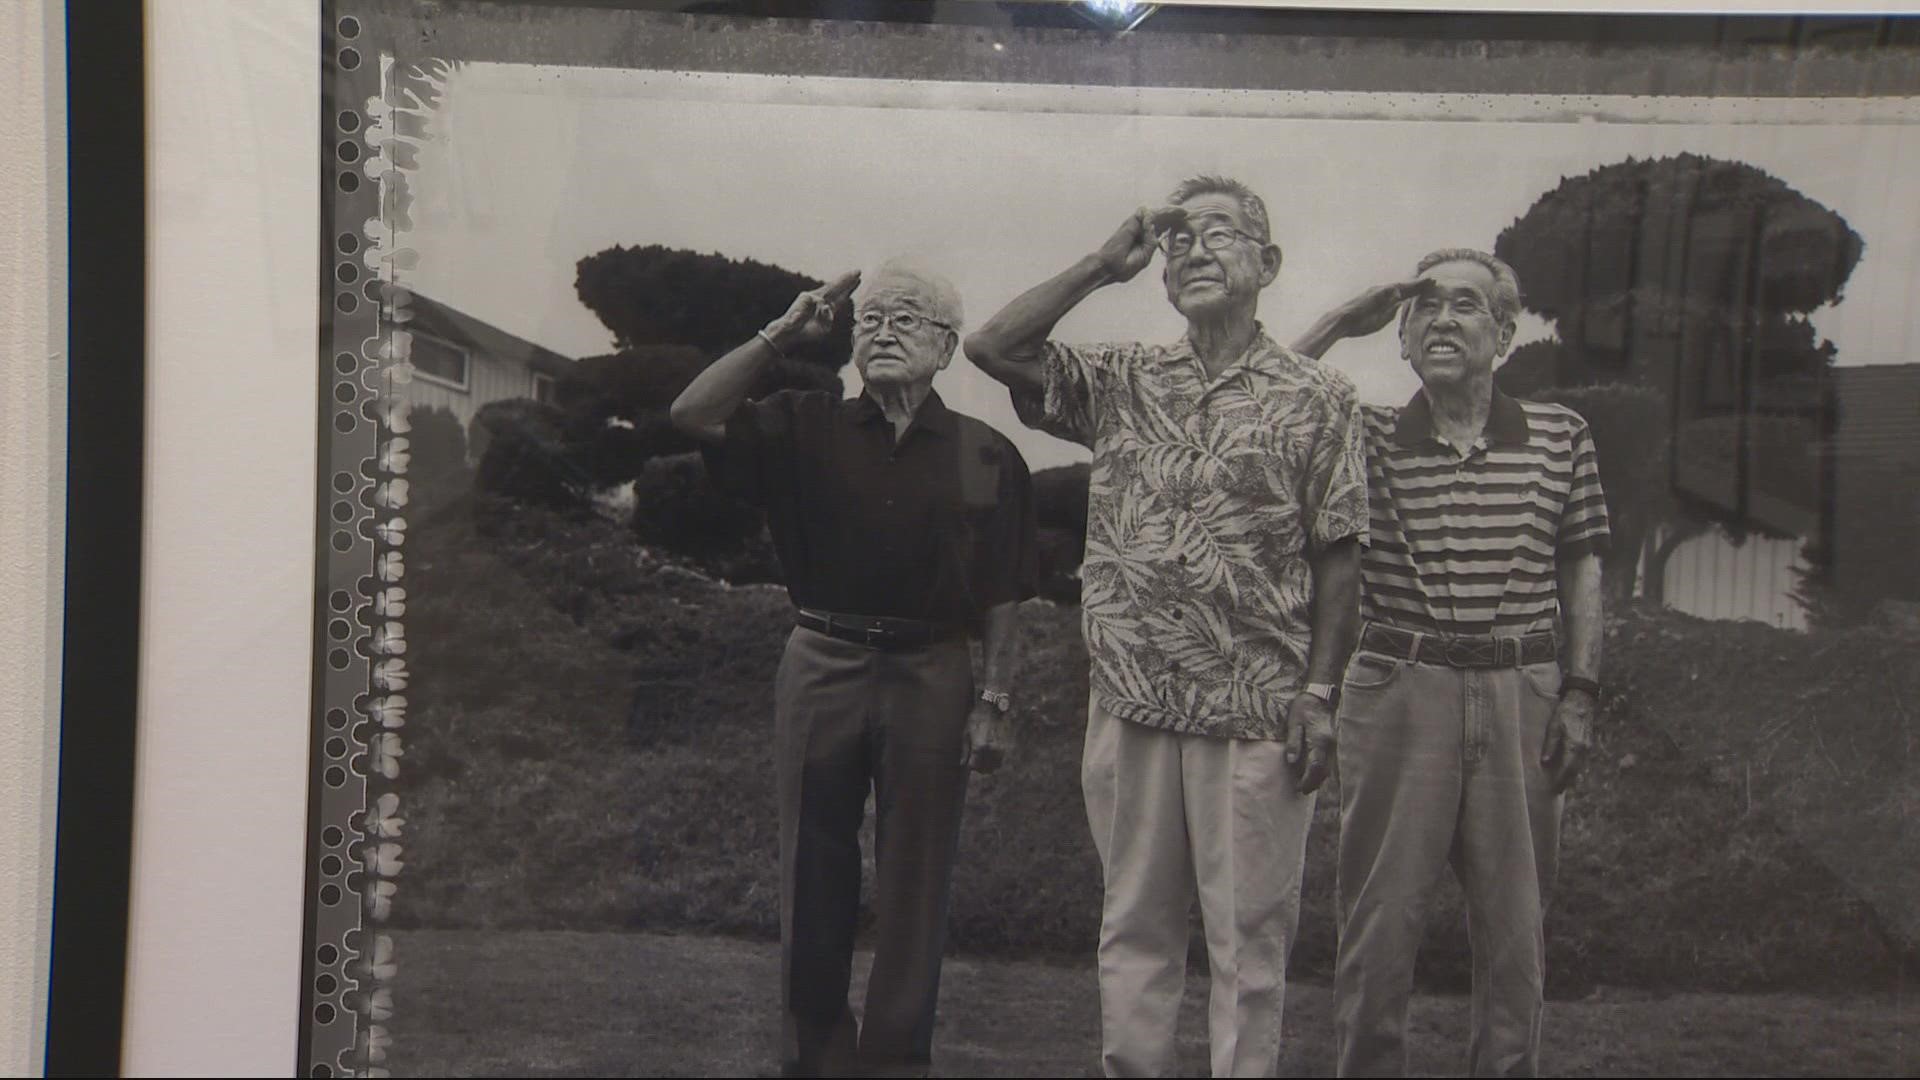 A photo exhibit at the Oregon Historical Society in Southwest Portland documents the hardship of Japanese Americans in the WWII era. KGW's Steve Redlin reports.